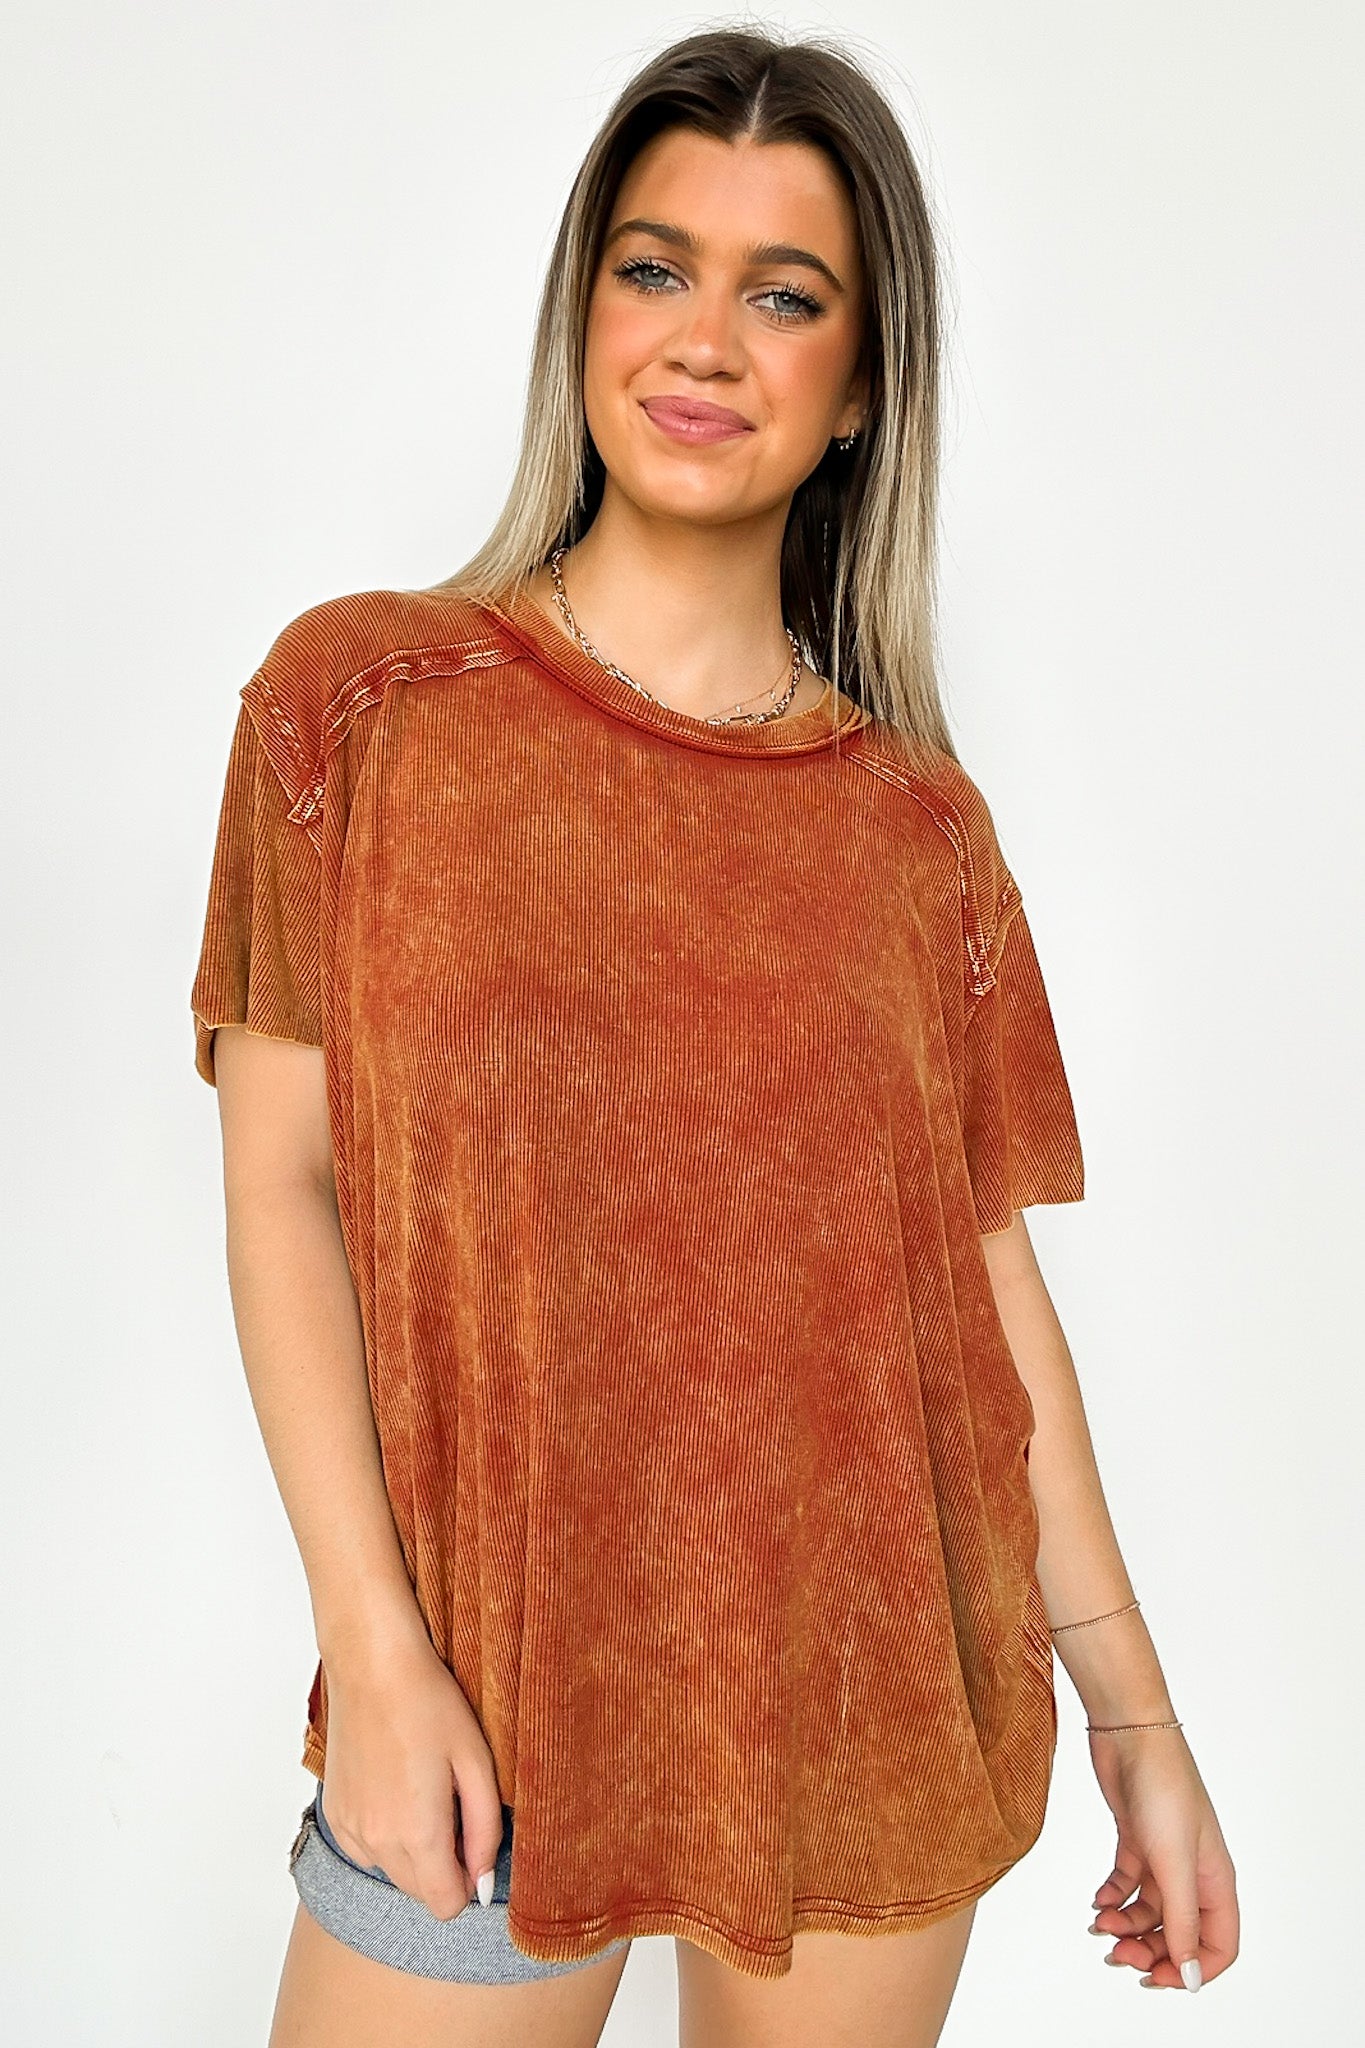  Mirissa Mineral Washed Boat Neck Top - BACK IN STOCK - Madison and Mallory